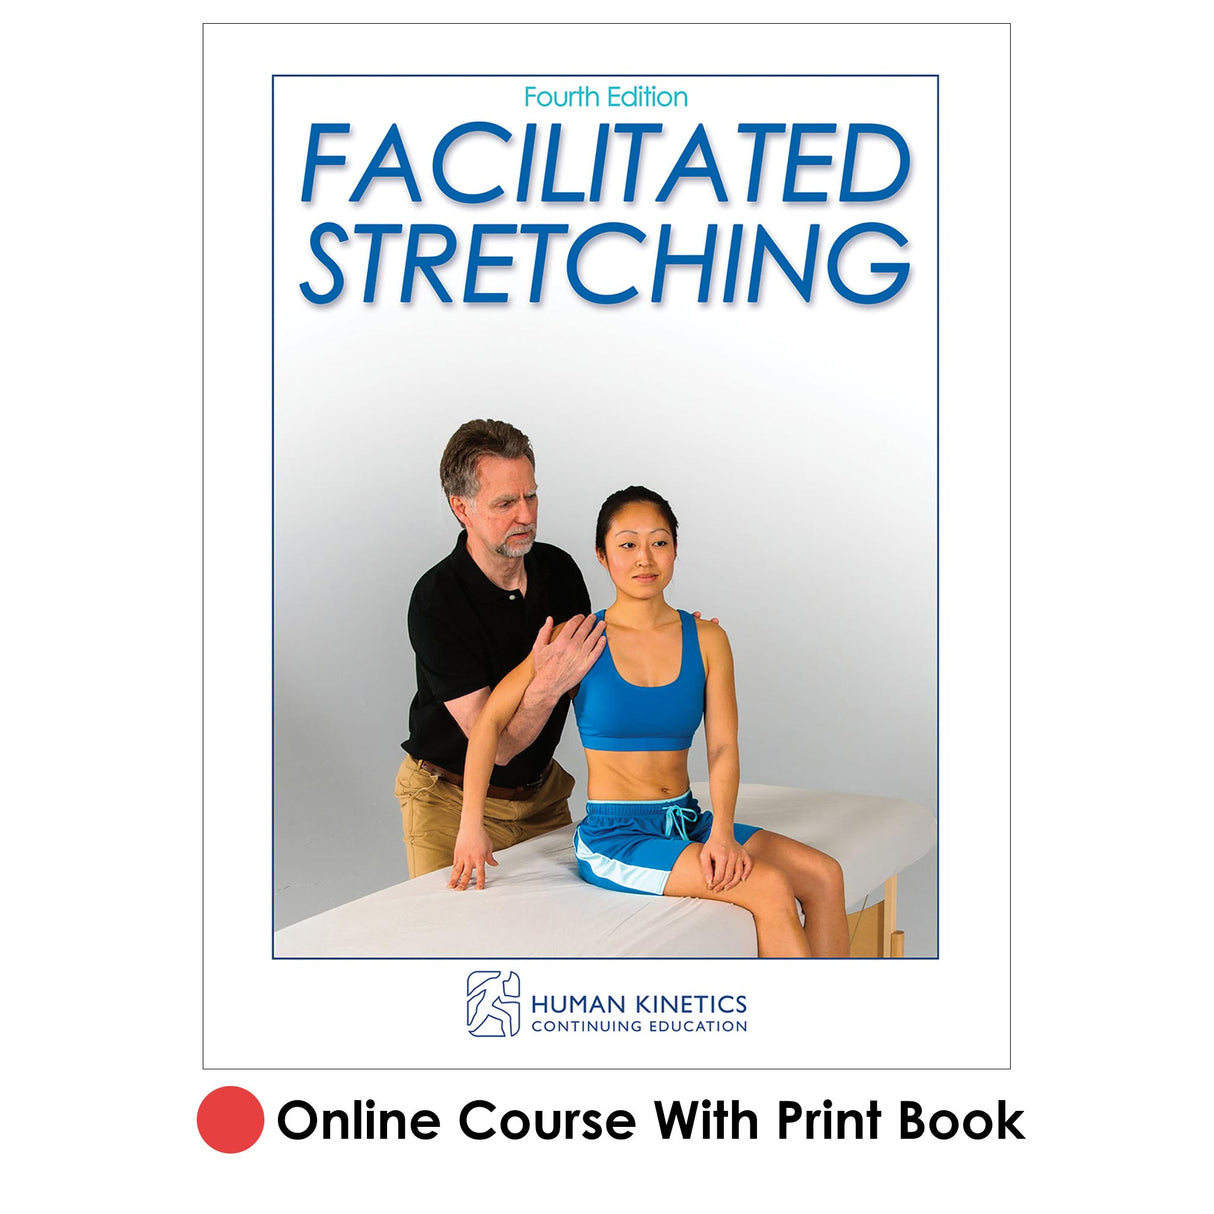 Facilitated Stretching 4th Edition Online CE Course With Print Book